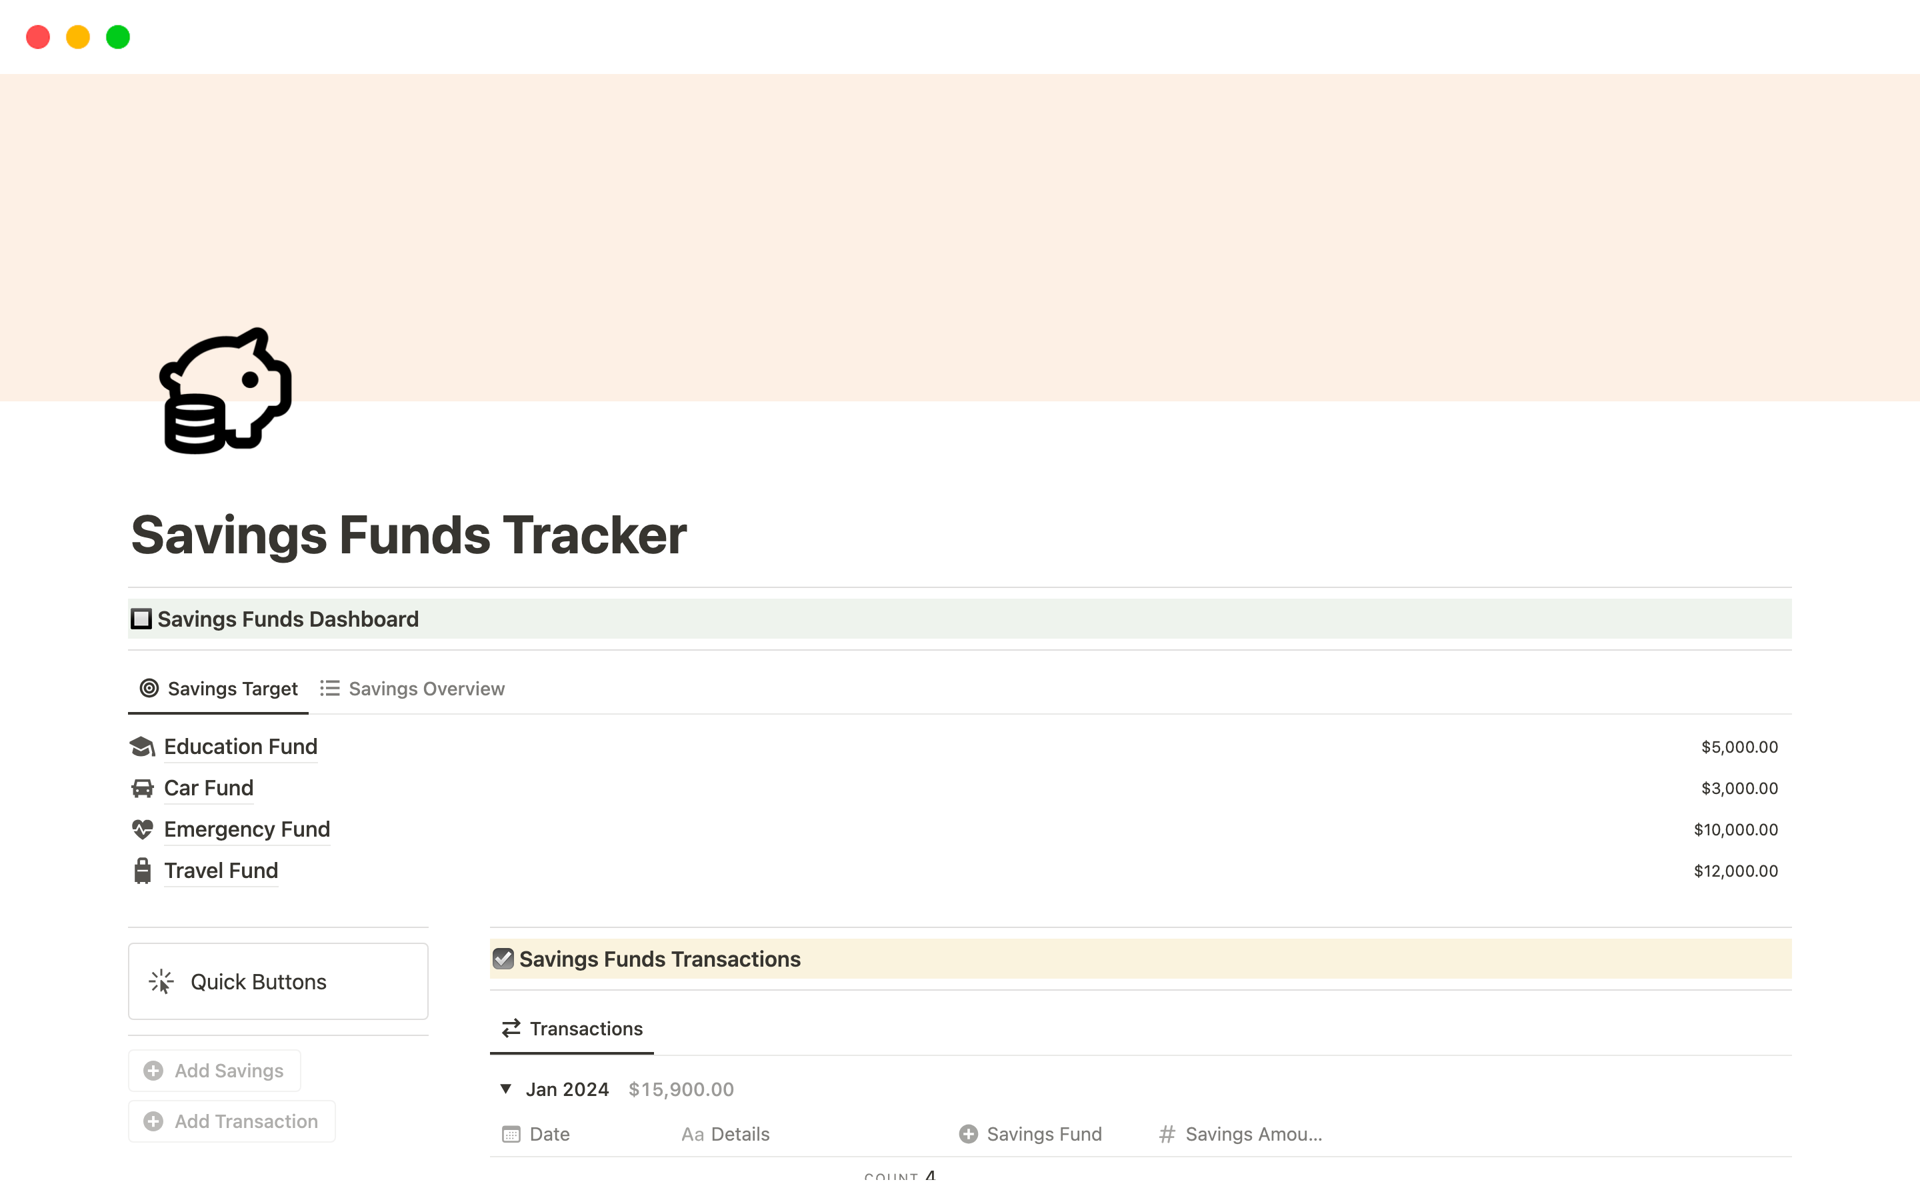 Save money creating savings funds and track your progressive contributions and savings with Savings Funds Tracker. 